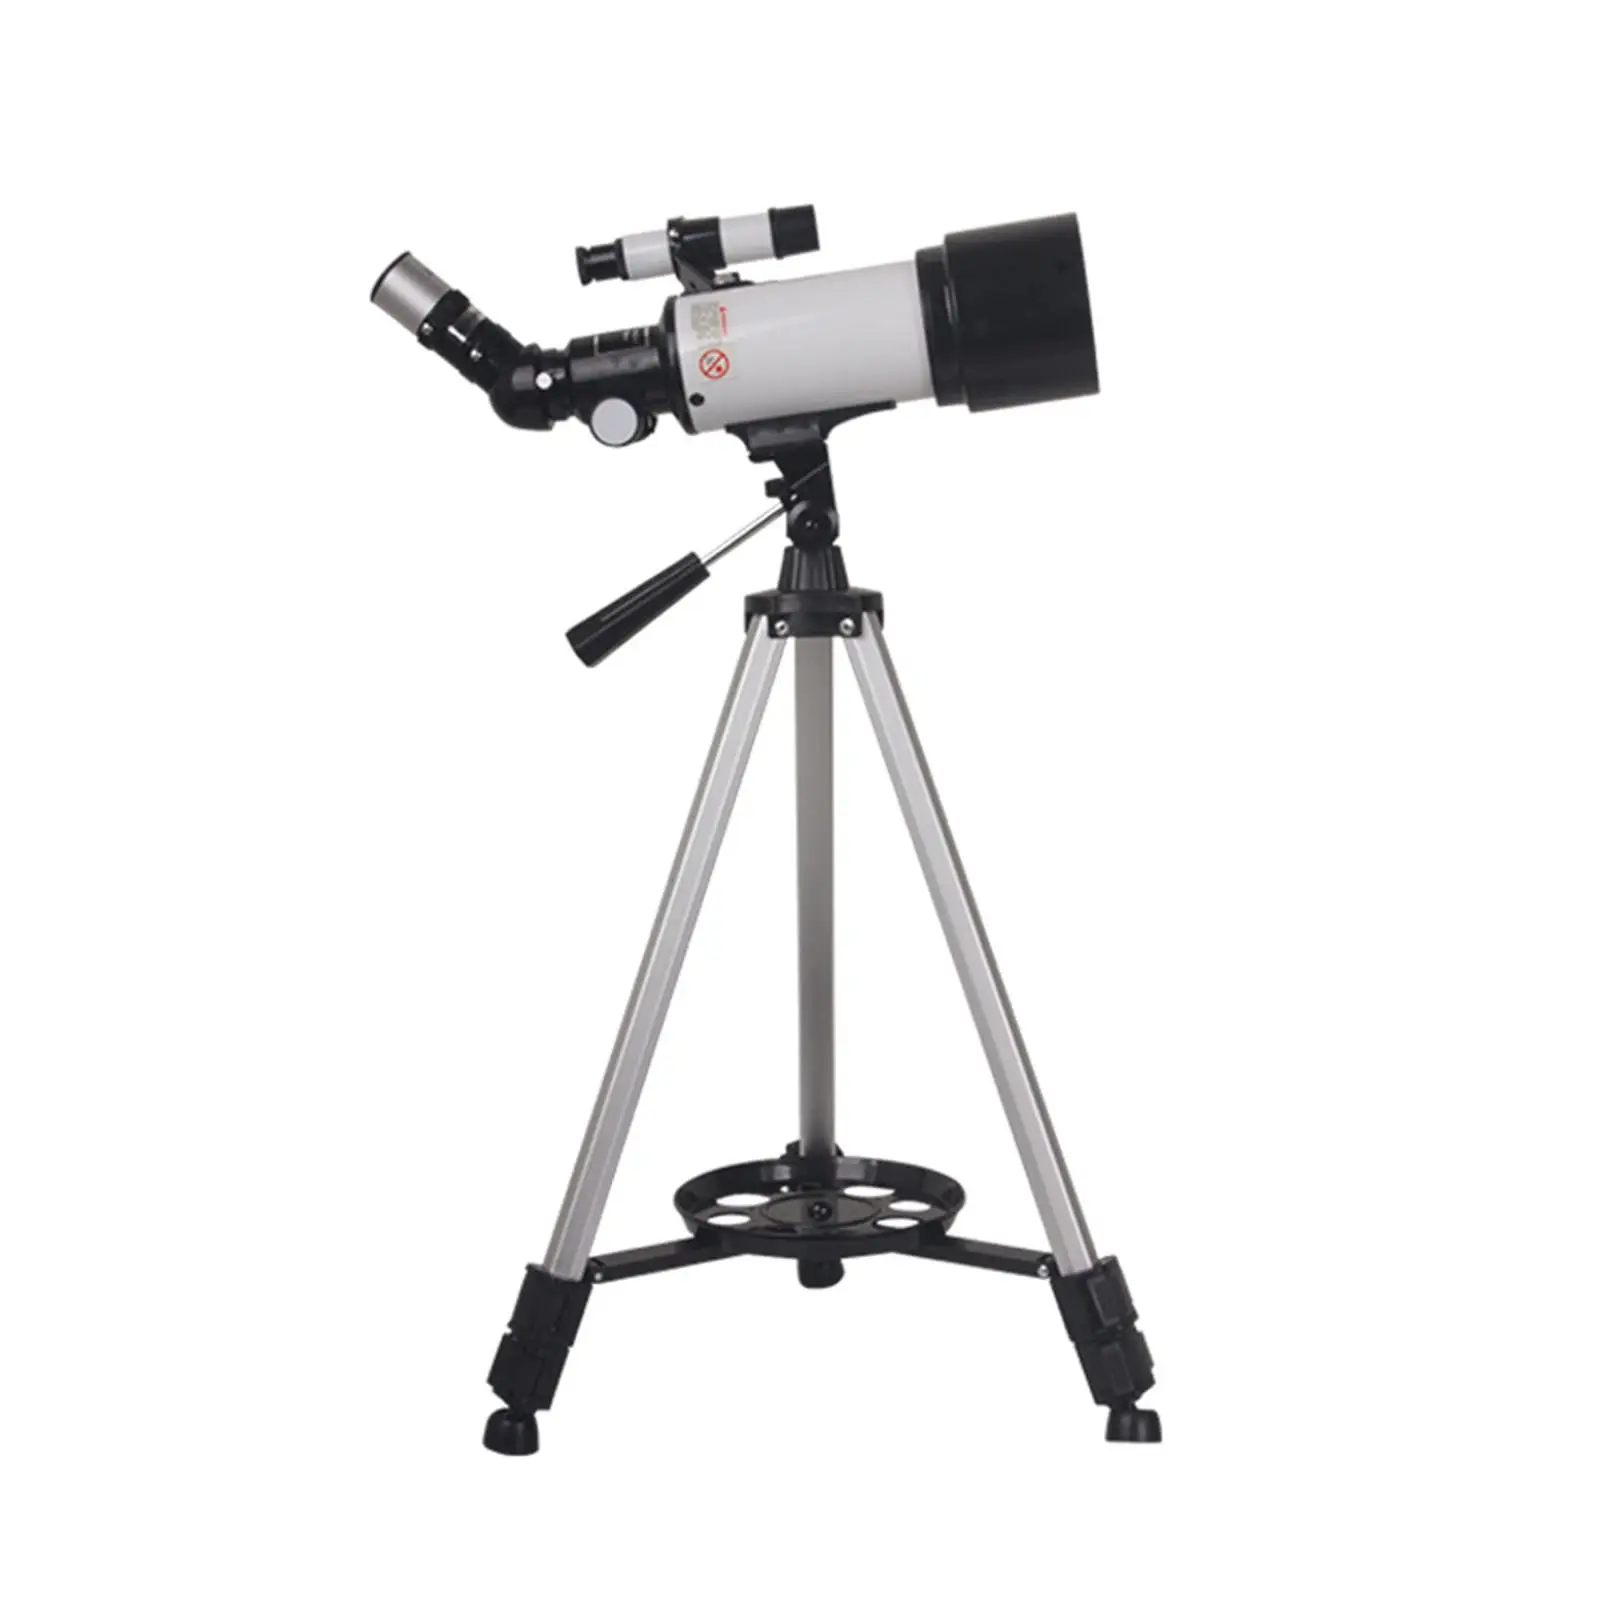 70mm 400mm Telescope with Tripod for Beginners for Wathcing Wildlife and